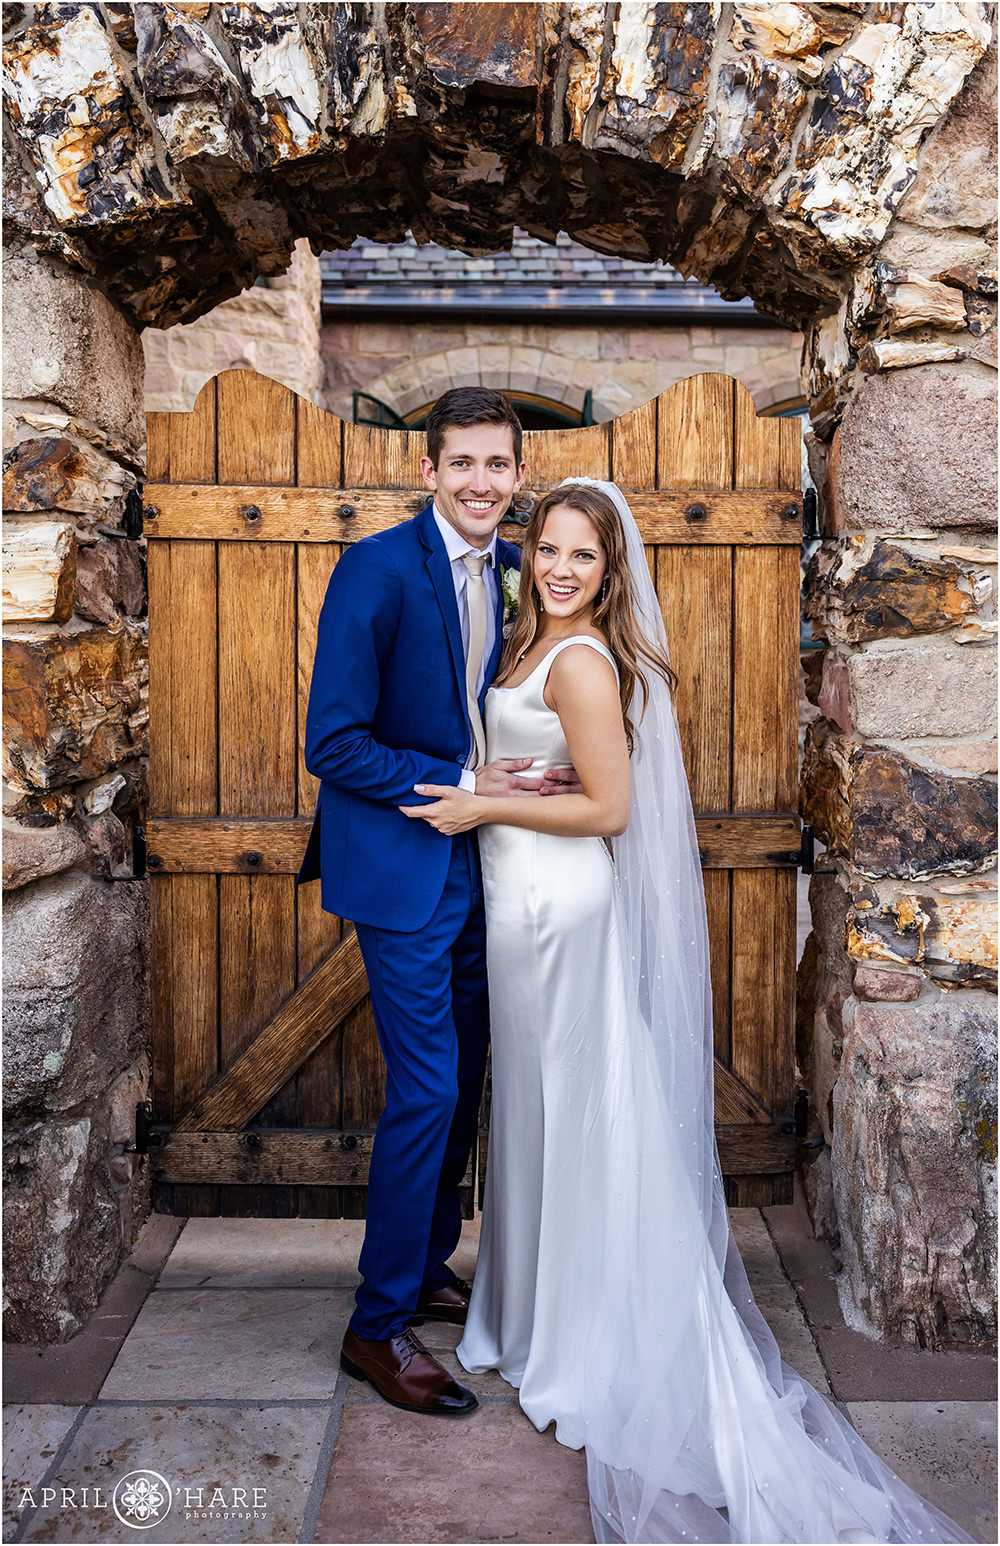 Adorable wedding couple poses in the archway at Cherokee Ranch and Castle